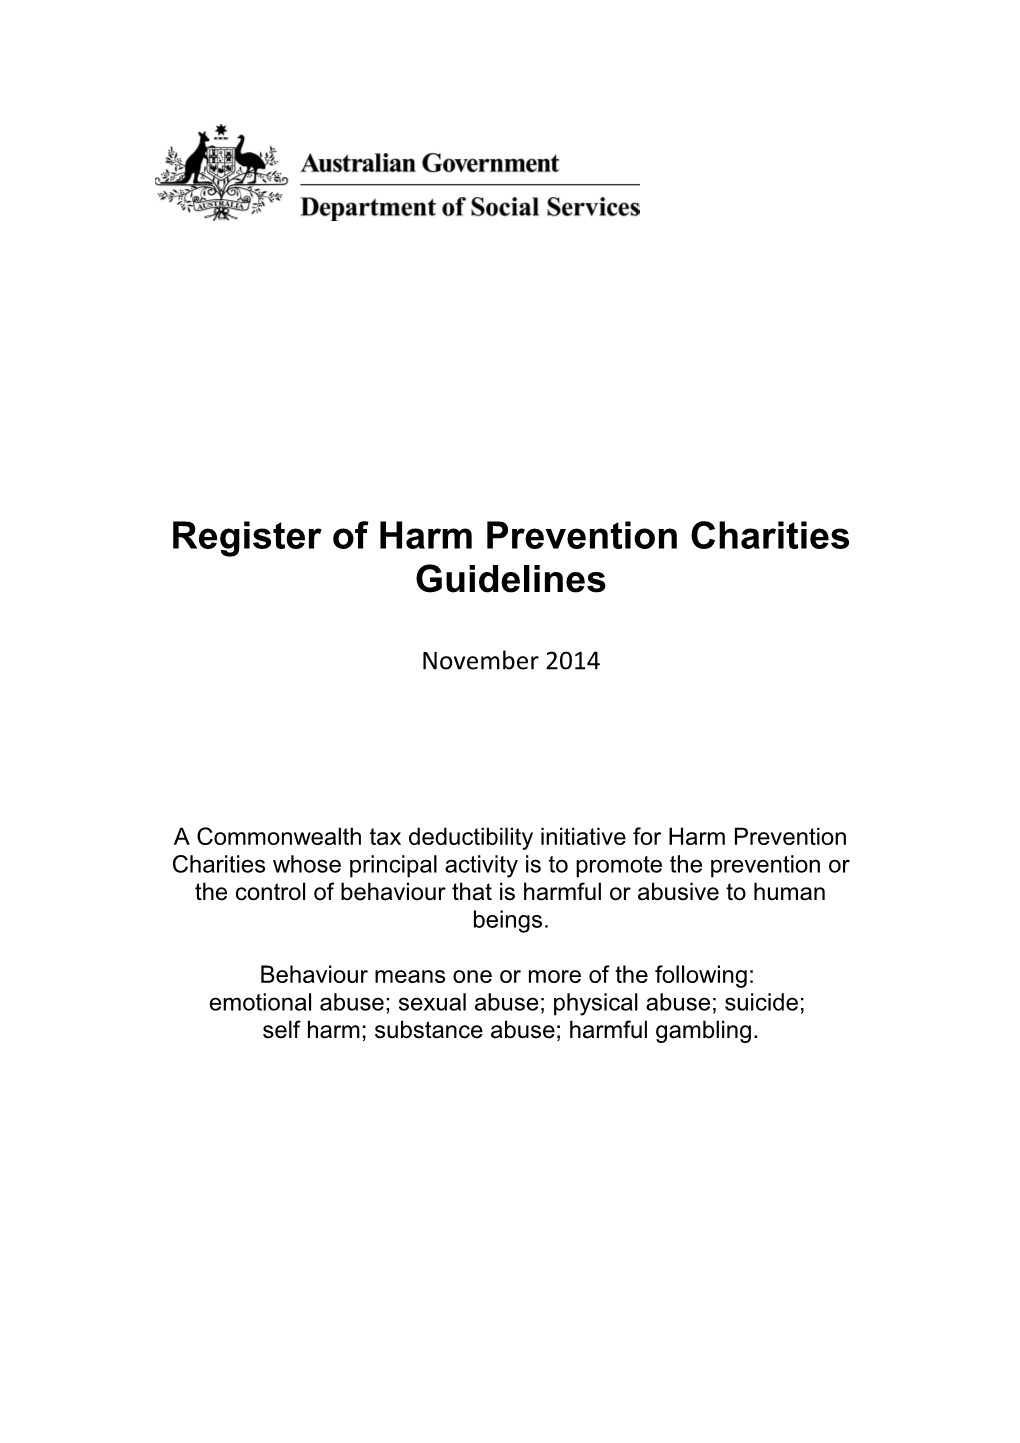 Register of Harm Prevention Charities Guidelines